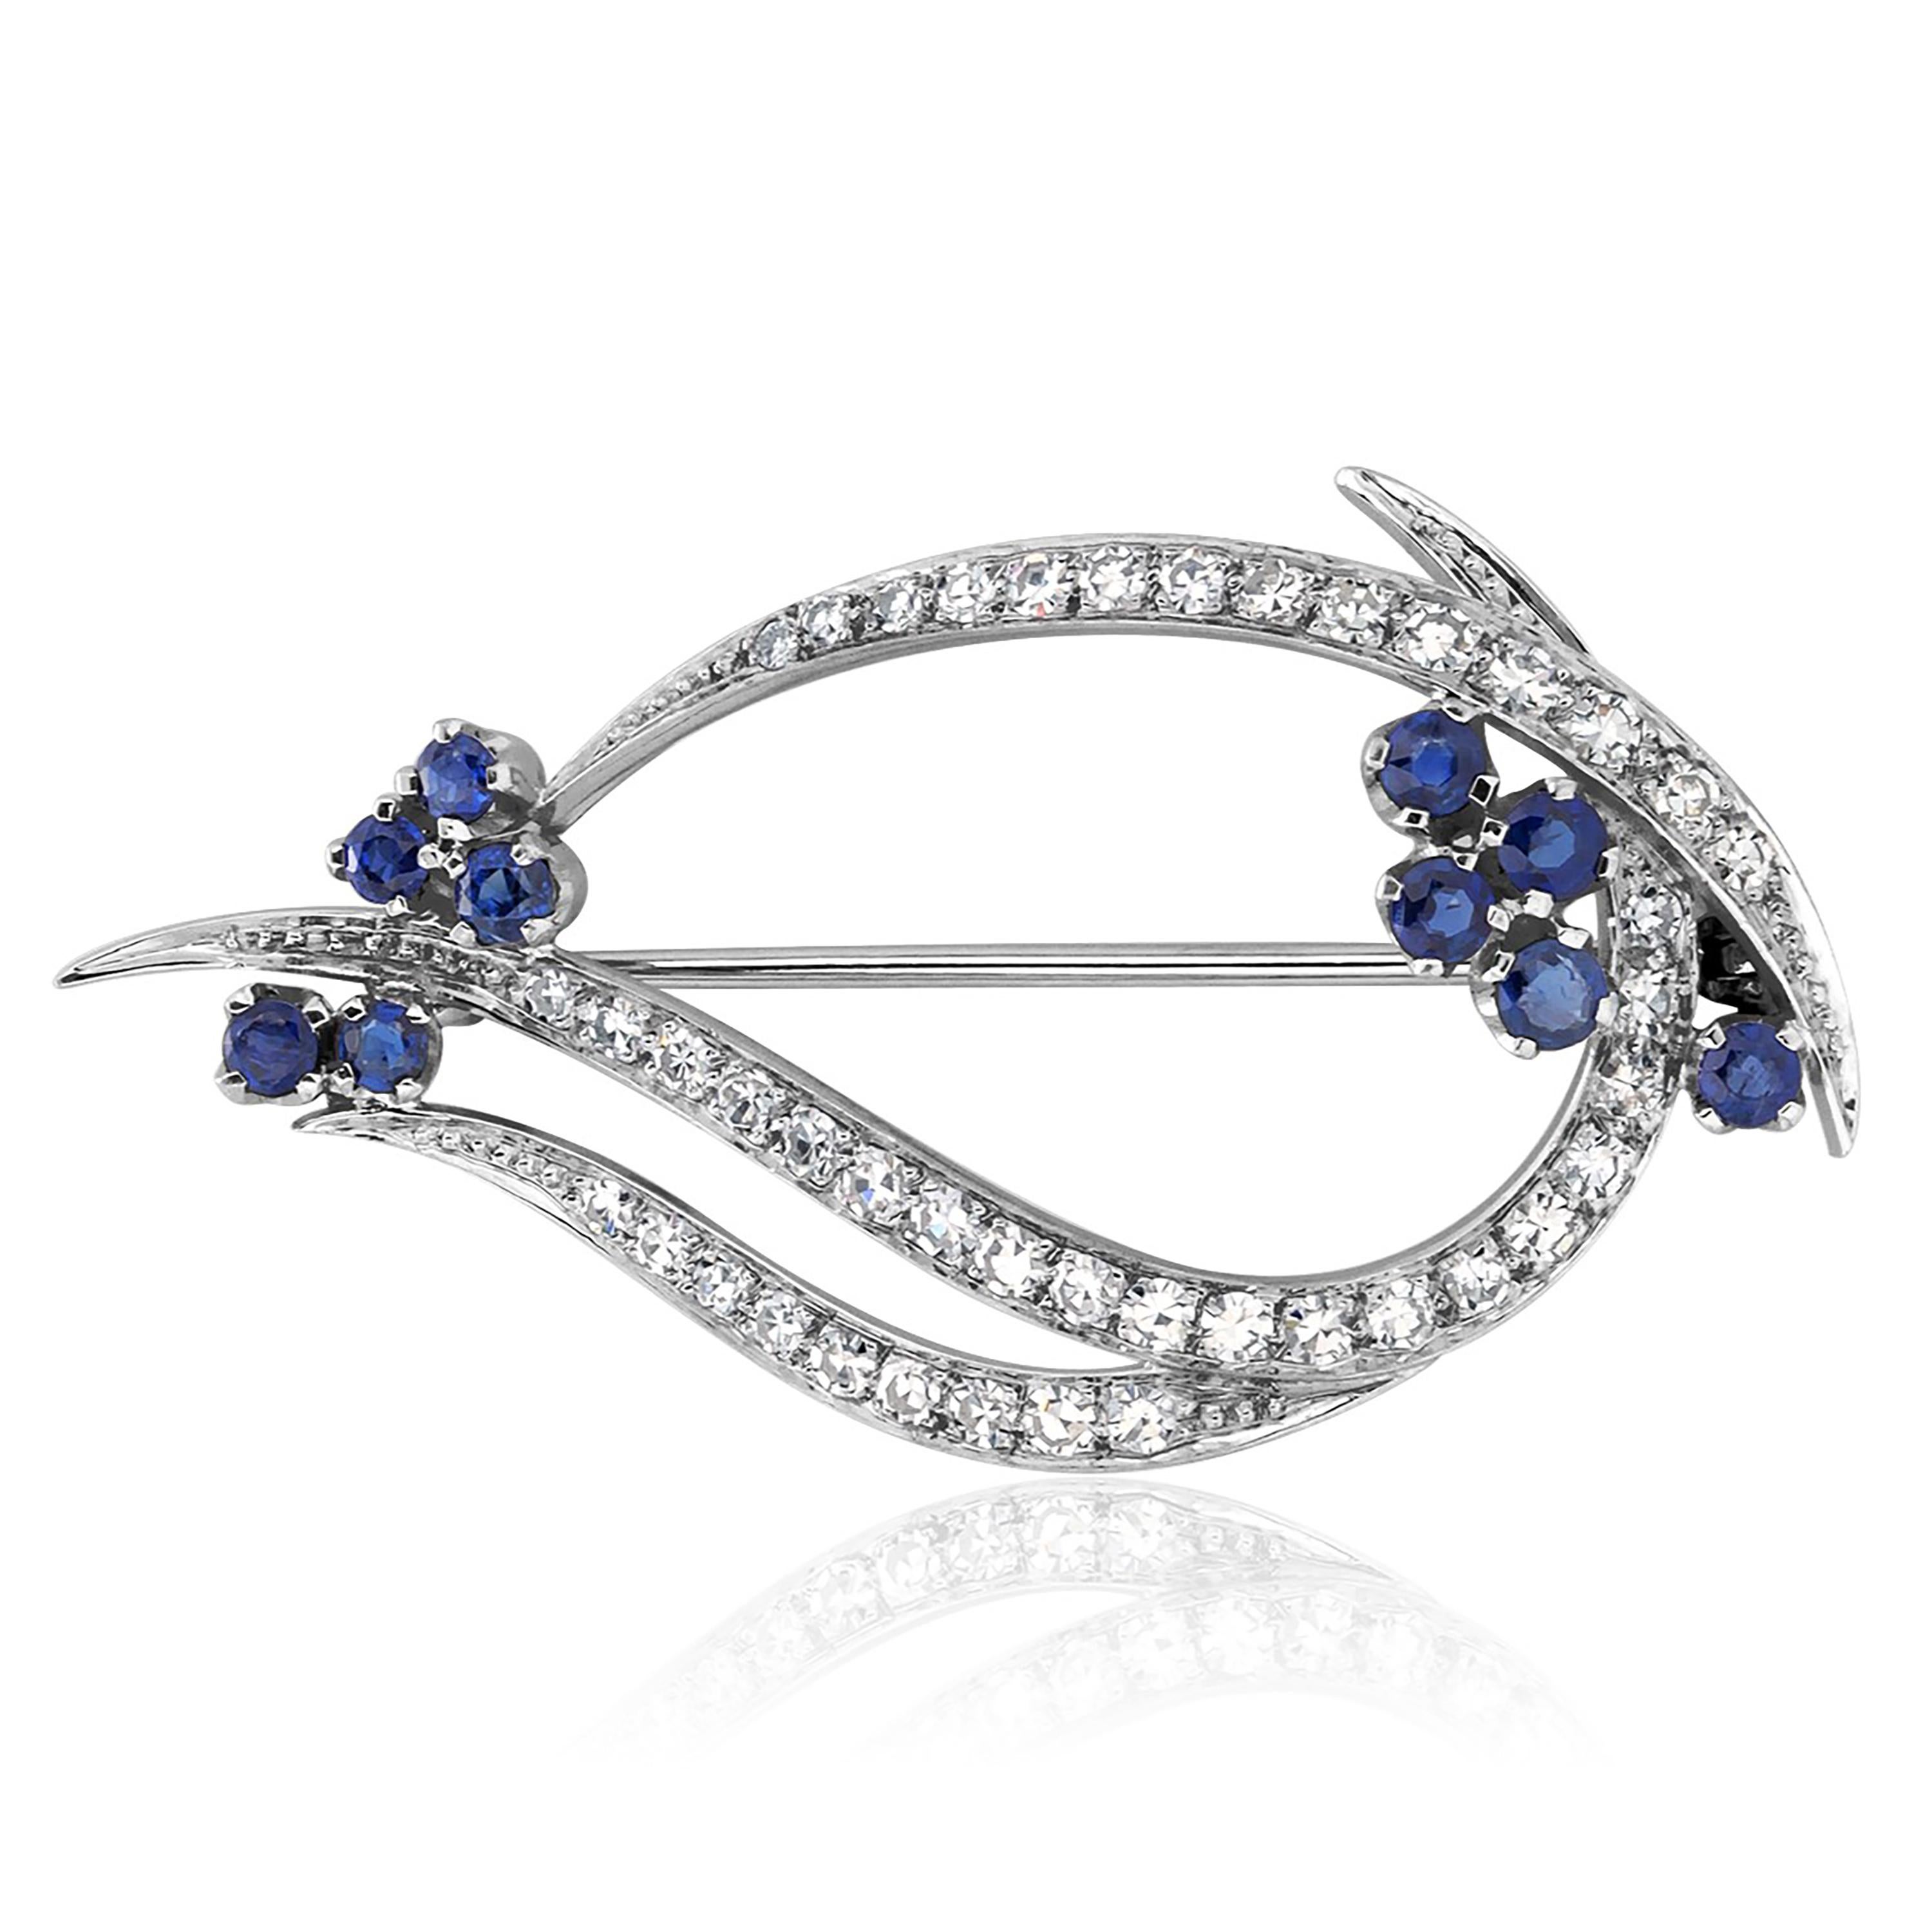 Platinum 1.75 Inch Flower Cluster Spray Brooch Diamond Leaves and Sapphires  In Good Condition For Sale In New York, NY